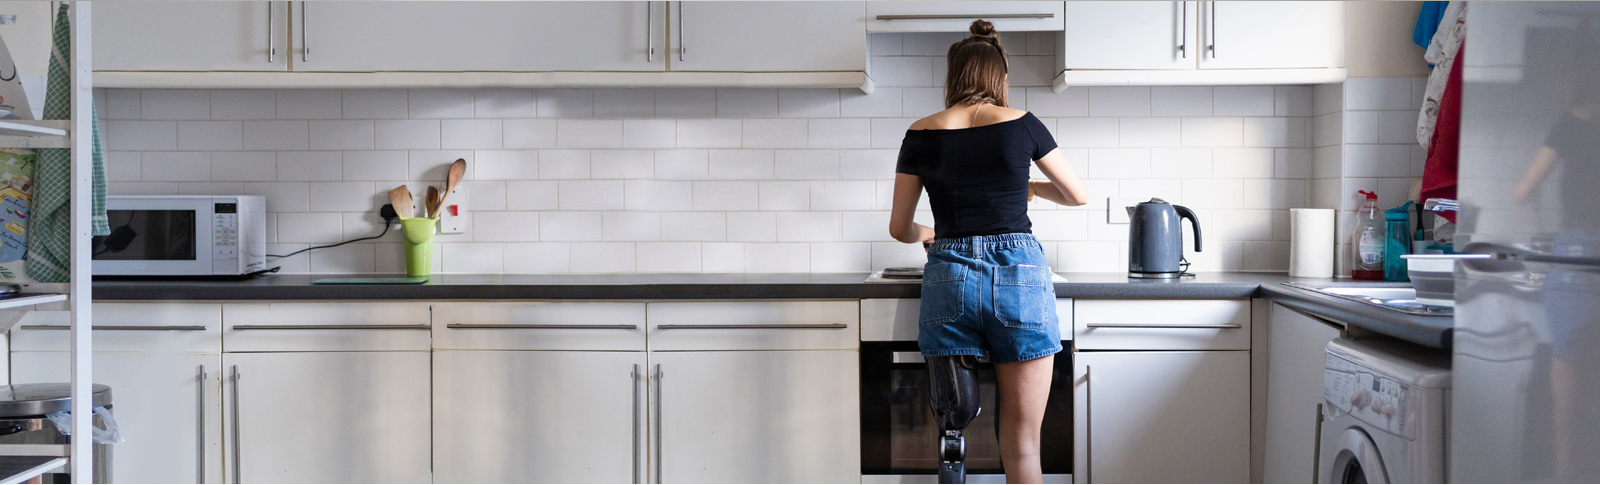 Woman standing at her kitchen stove, her back is to the camera. She has a full prosthetic left leg. She is wearing a black short-sleeved shirt and jean shorts. The tidy kitchen has black counters, white cabinets and white wall tiles.